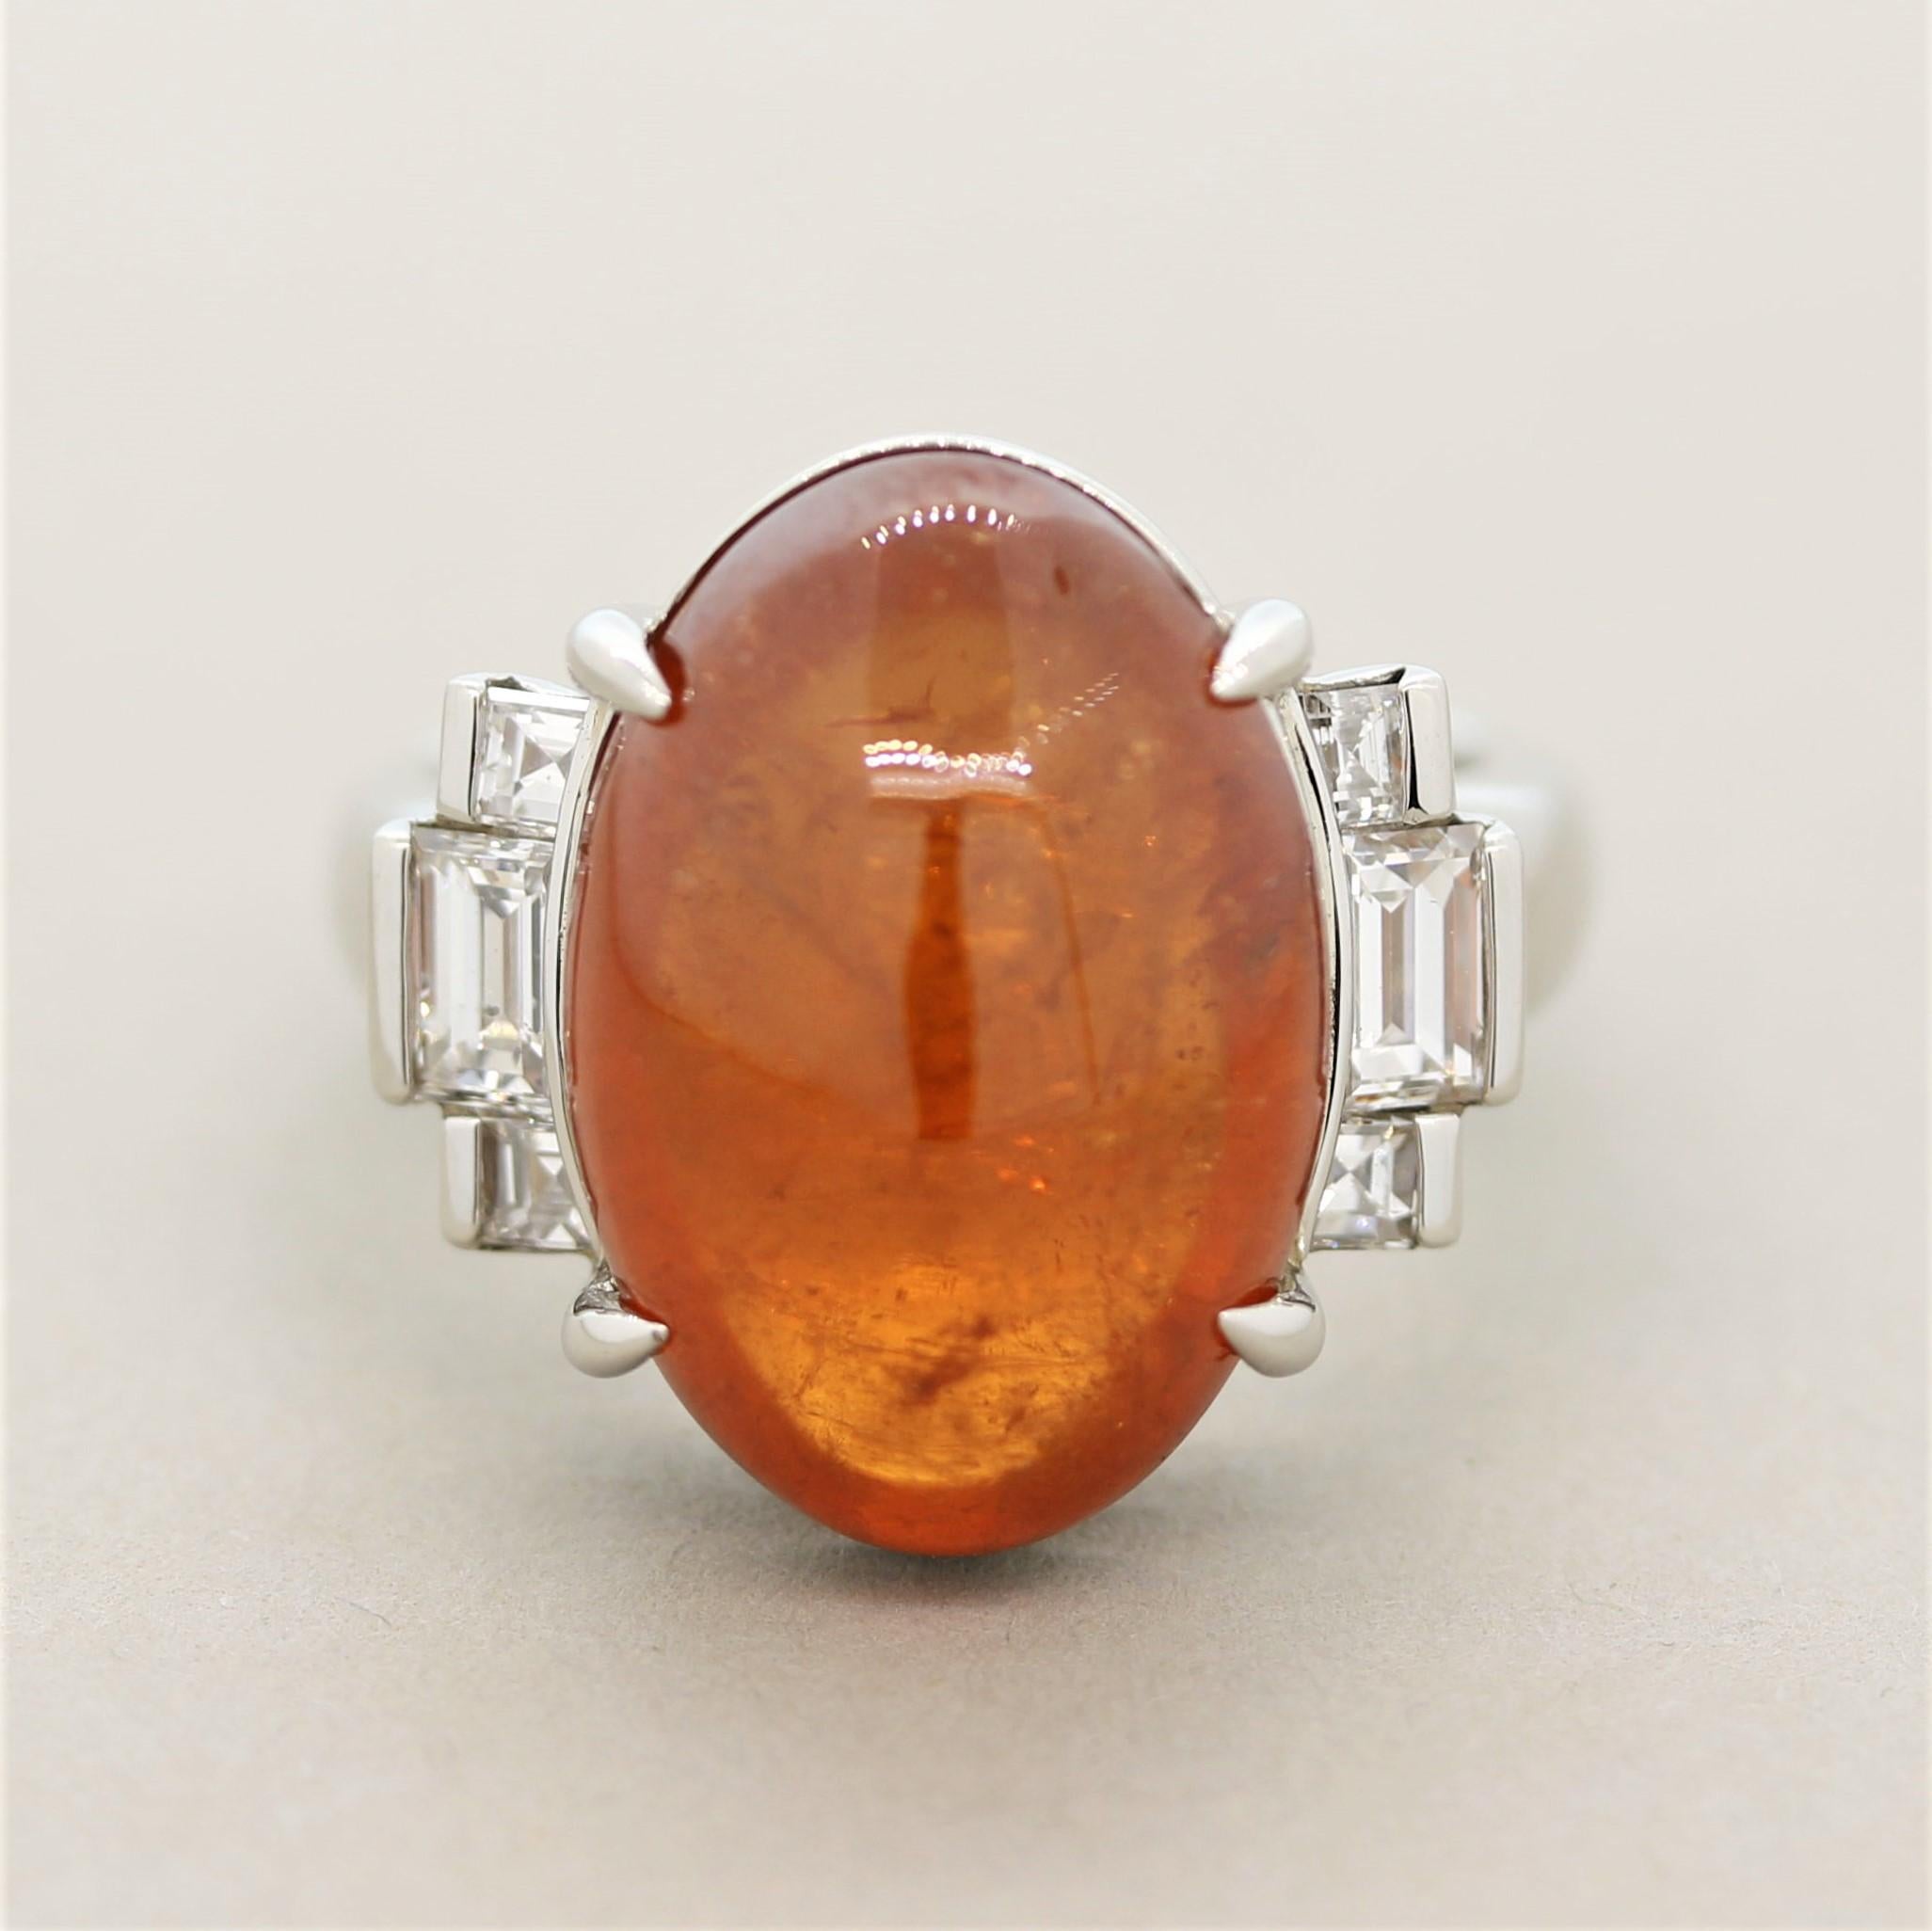 A simple yet chic ring featuring a 17.62 carat fire opal with a deep reddish-orange color. It is accented by 0.70 carats of square and rectangular shaped diamond set on the two sides of the opal. Hand-fabricated in platinum.

Ring Size 6.25